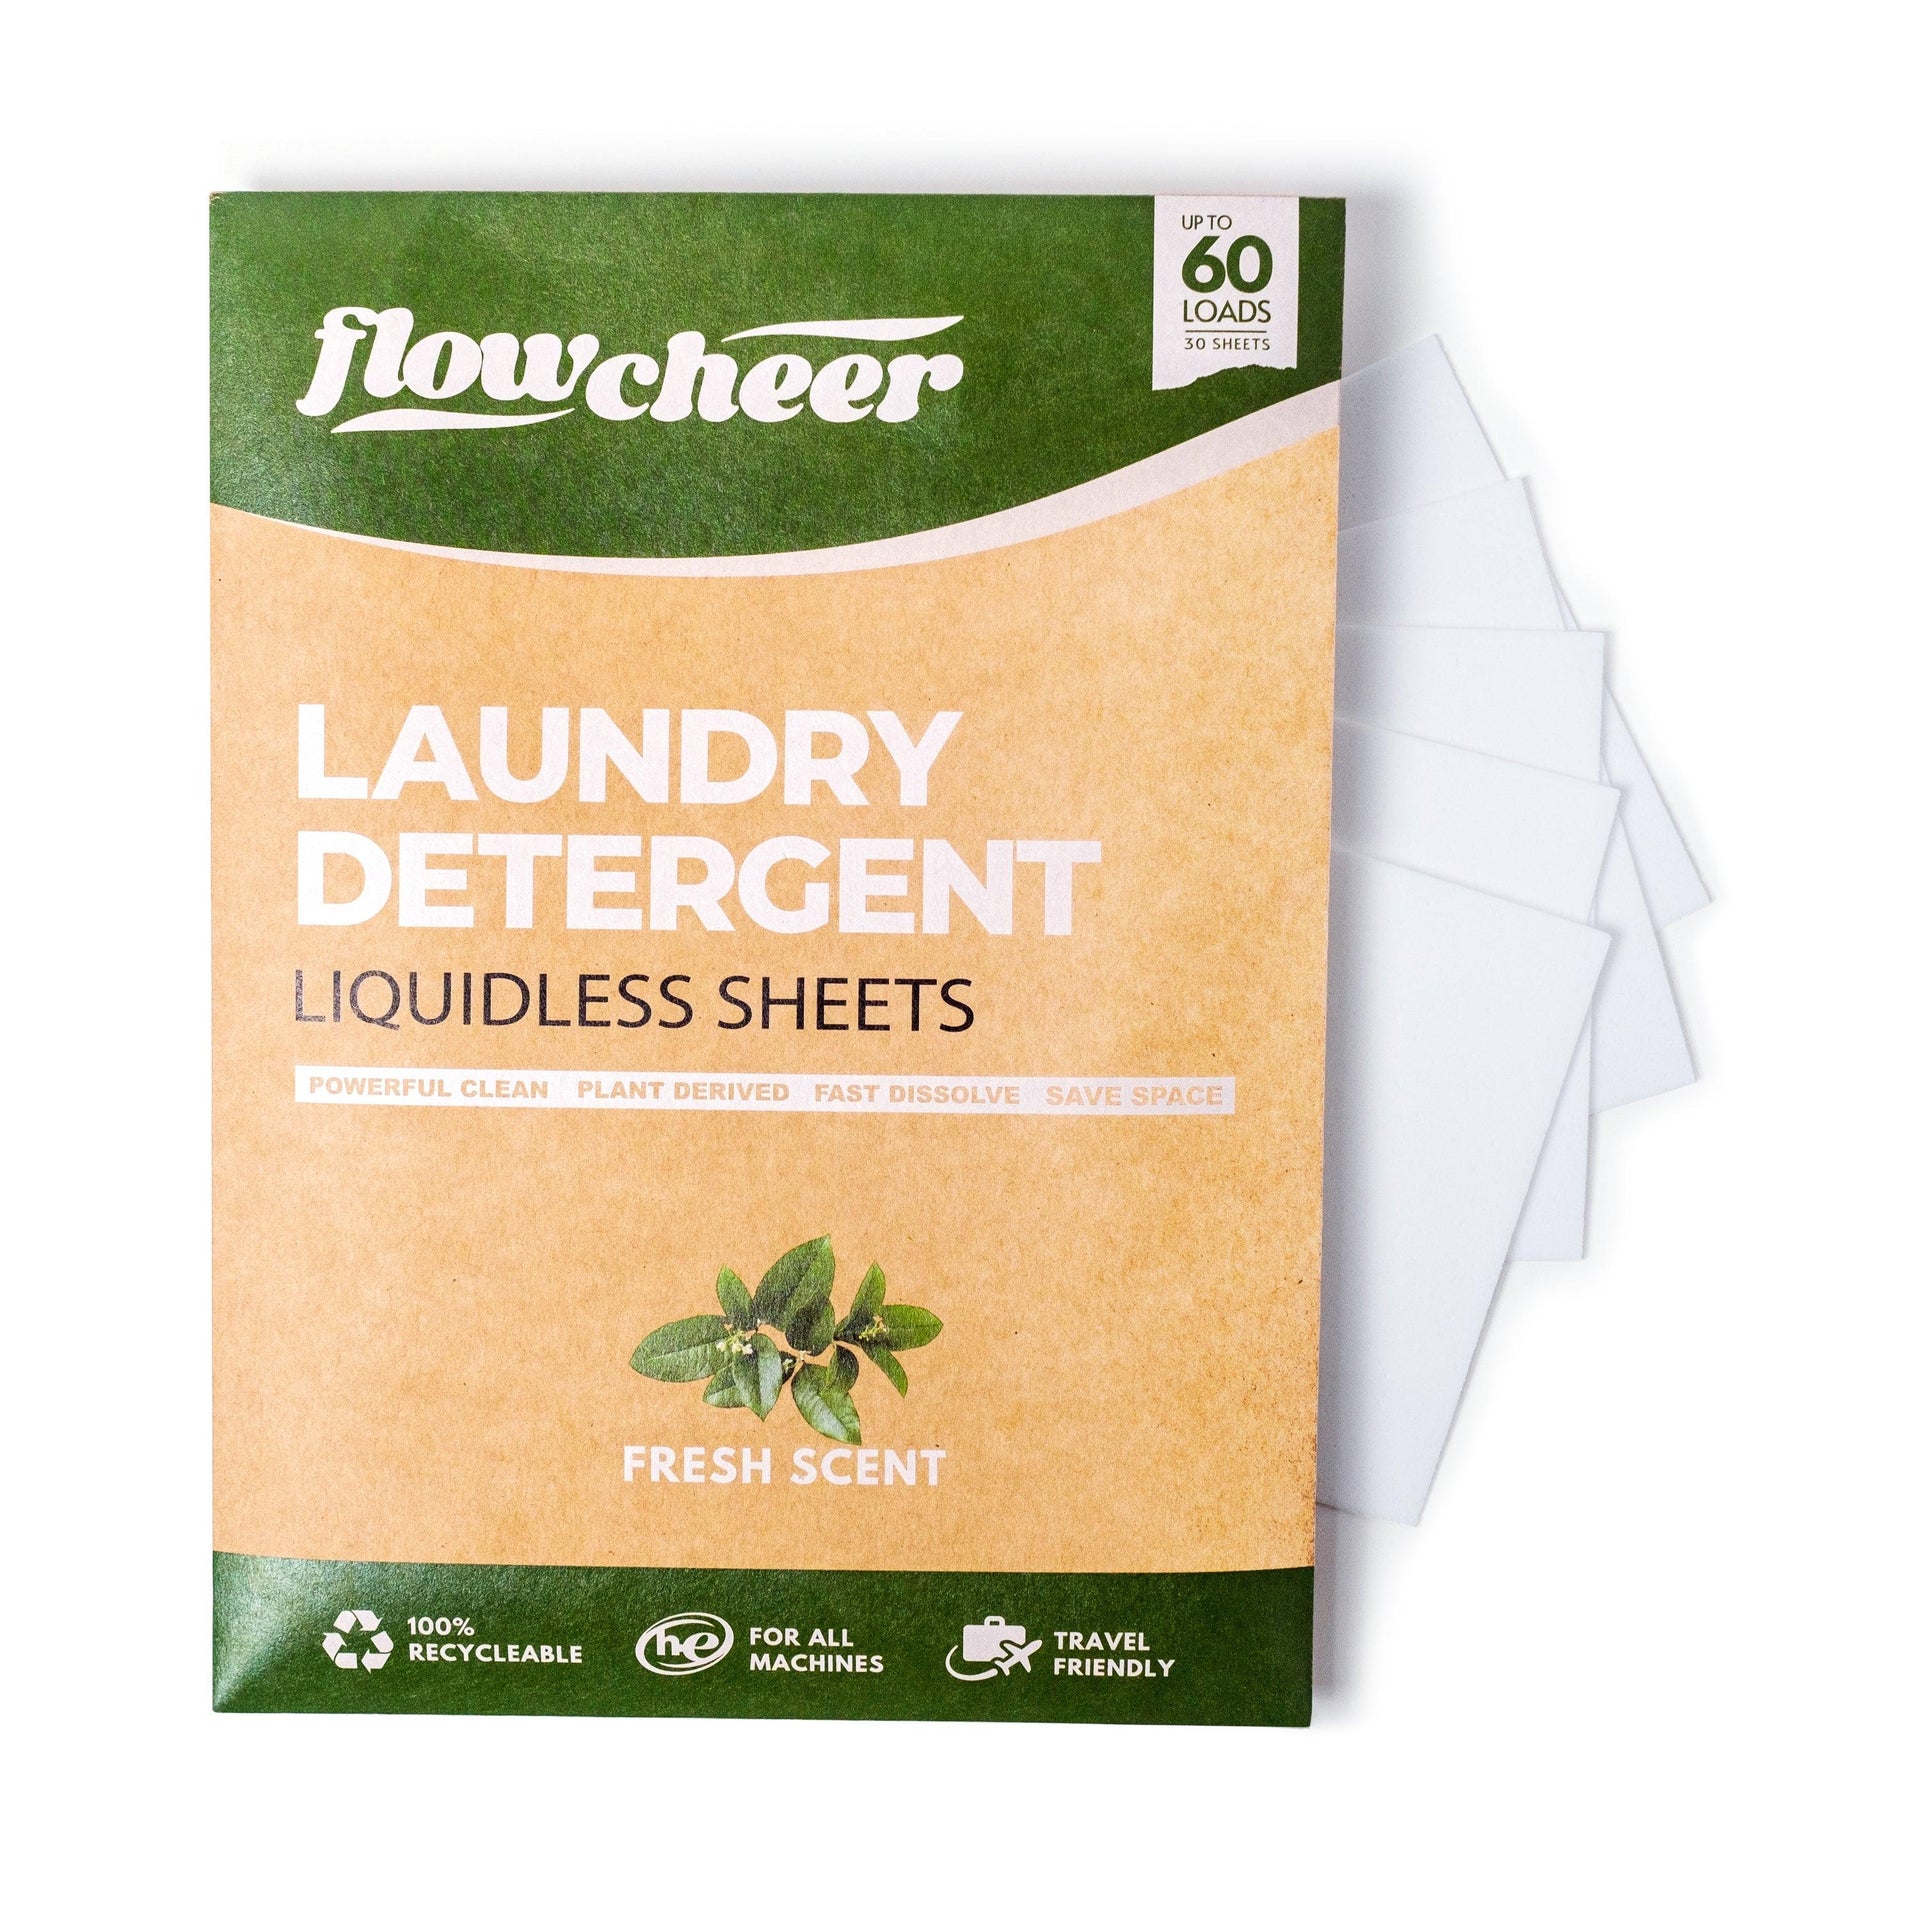 Flowcheer Laundry Detergent Sheets - 50 Sheets - Unscented Fragrance